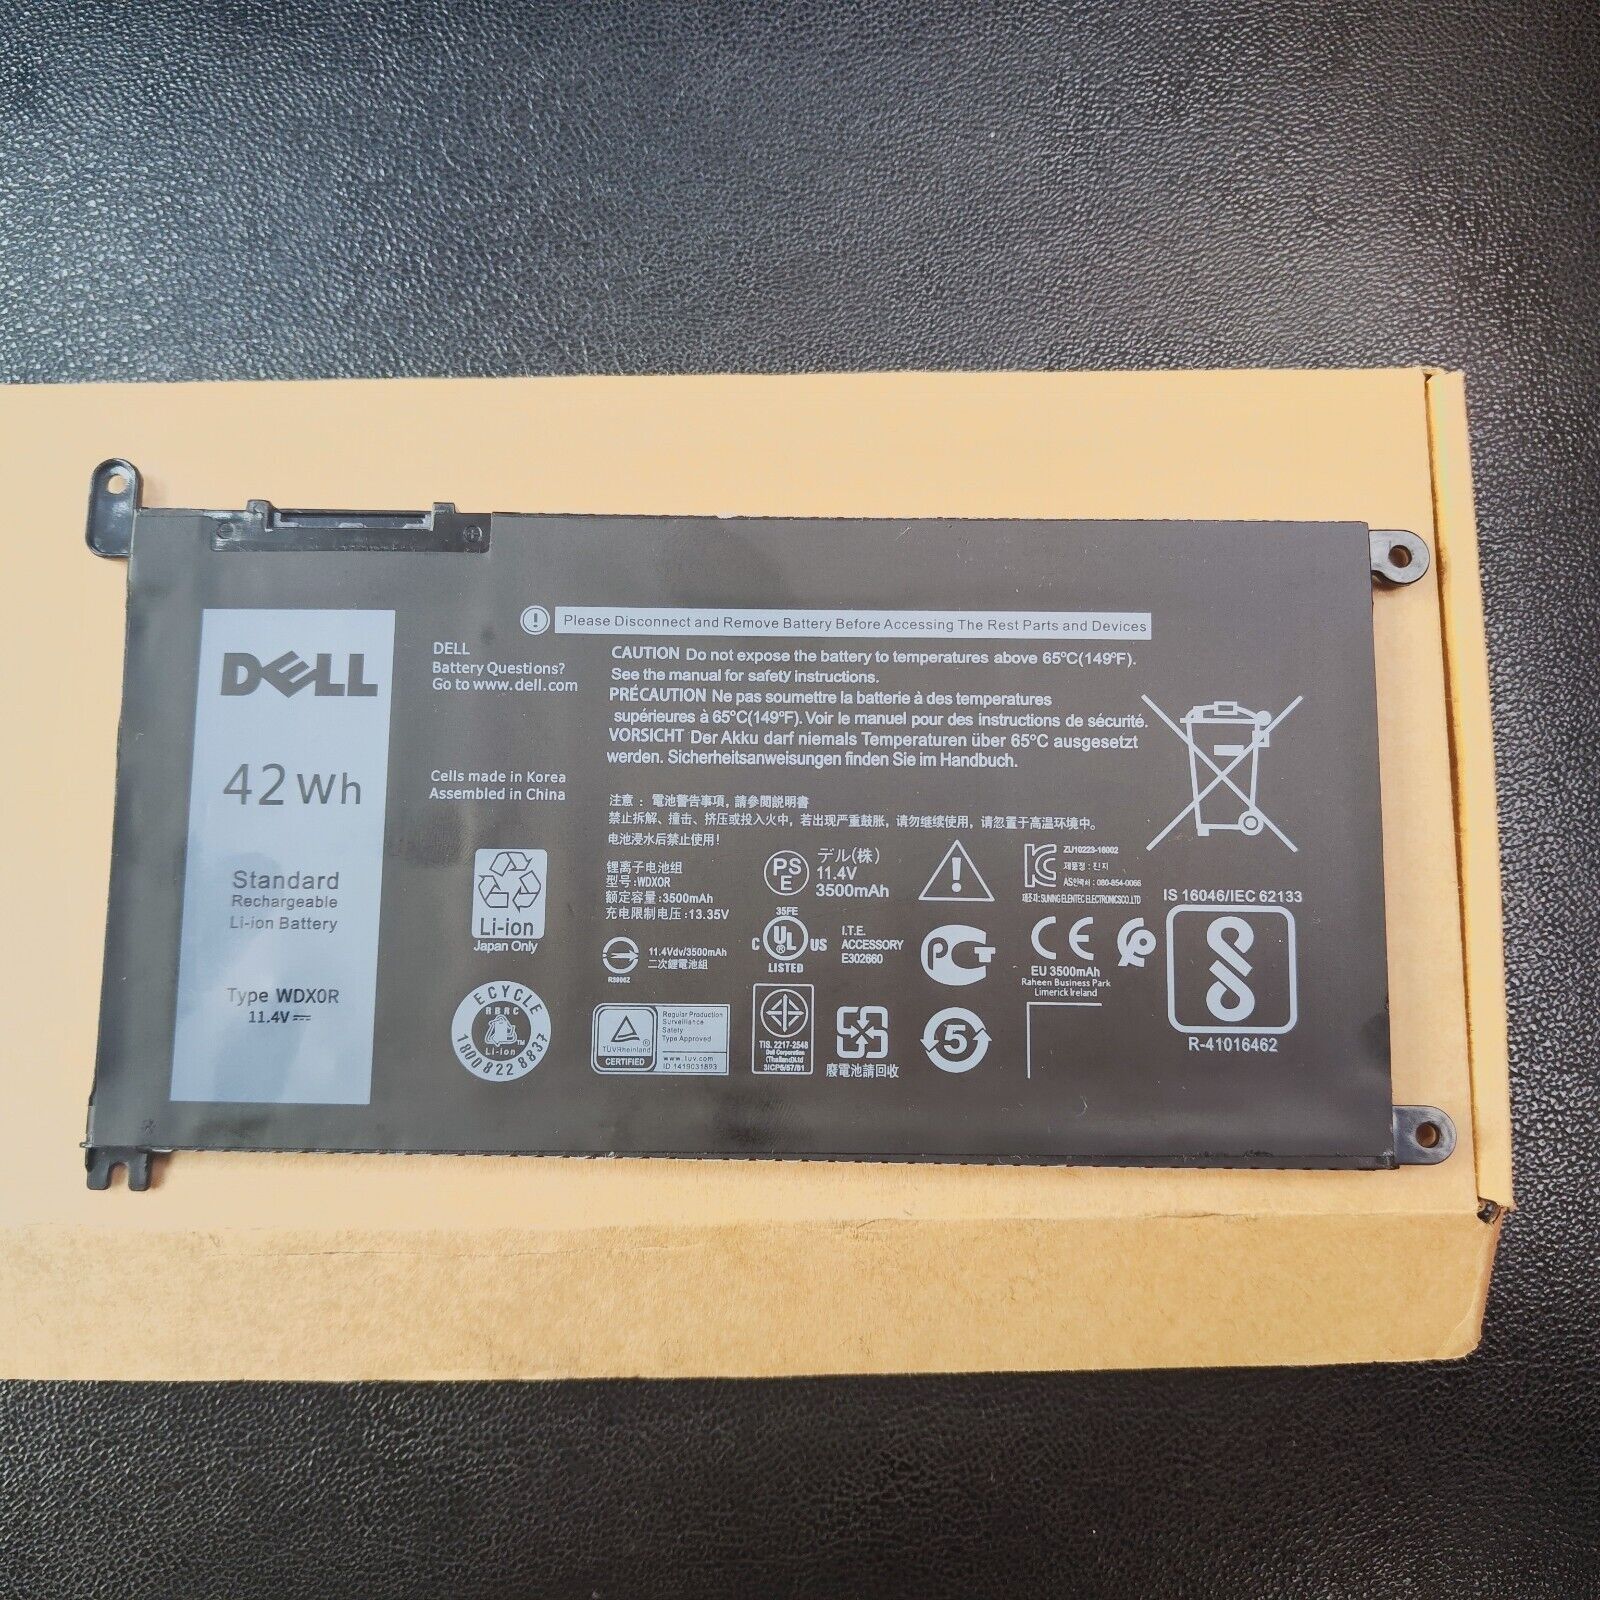 OEM WDX0R Laptop Battery 42Wh For Dell Inspiron 15 5567 5568 13 5368 7368 7569